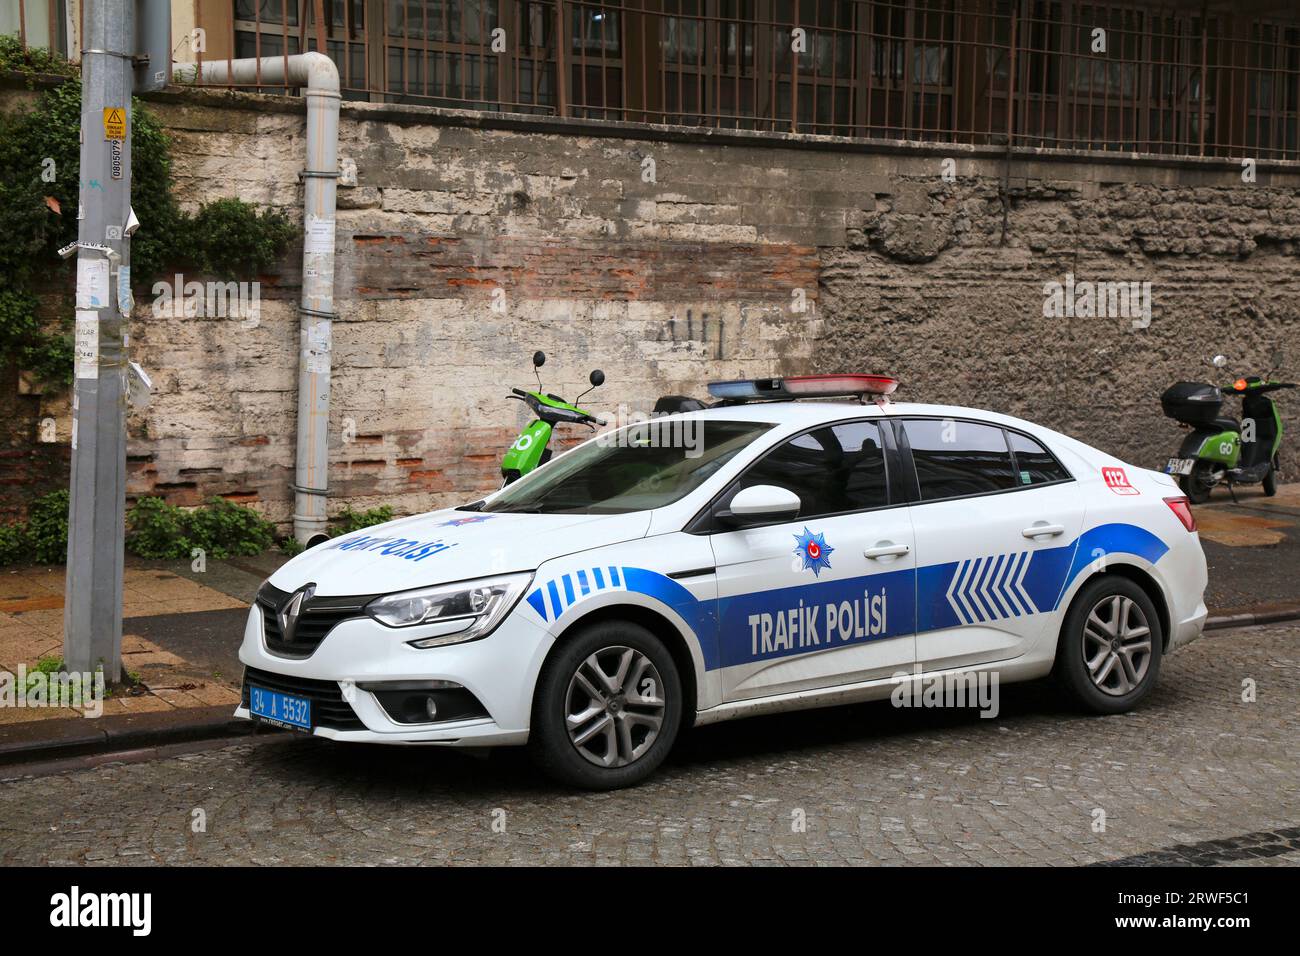 ISTANBUL, TURKEY - APRIL 11, 2023: Turkish Traffic Police patrol car, Renault Fluence parked in the street in Istanbul. Stock Photo